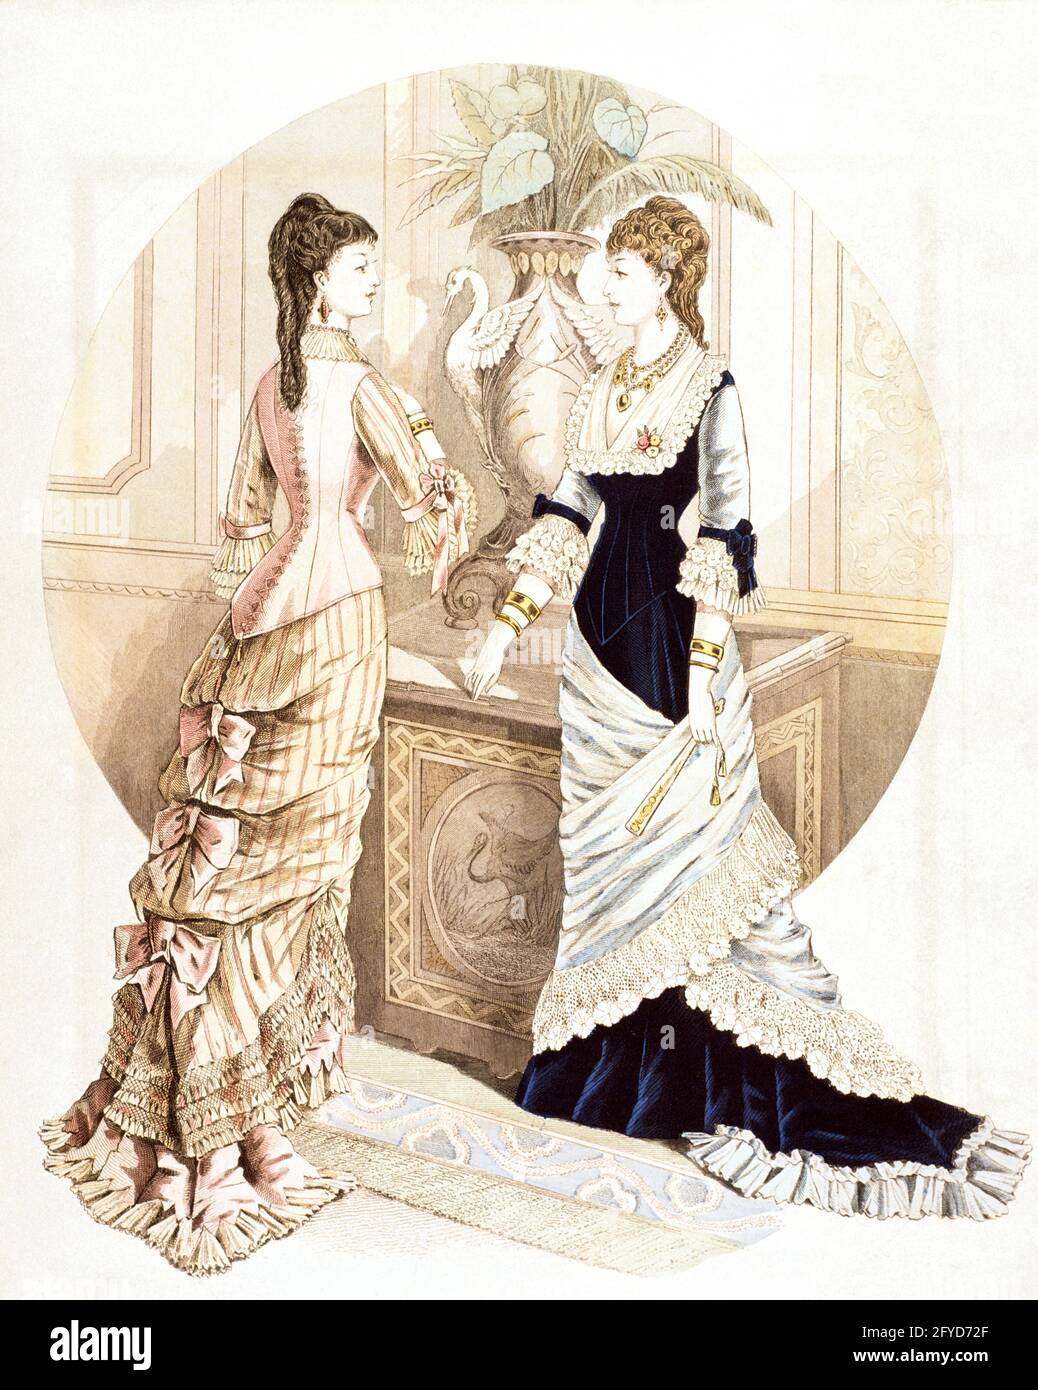 1870s 1800s FASHION PLATE TWO WOMEN IN DRESSES FRONT & REAR VIEW JANUARY 1877 DEMOREST’S MONTHLY VICTORIAN MAGAZINE  - kh13419 NAW001 HARS JANUARY TURN OF THE 20TH CENTURY IN FEMININE 19TH CENTURY MONTHLY 1870s STYLISH CREATIVITY FASHION PLATE FASHIONS WAIST YOUNG ADULT WOMAN 1877 CAUCASIAN ETHNICITY OLD FASHIONED WASP Stock Photo